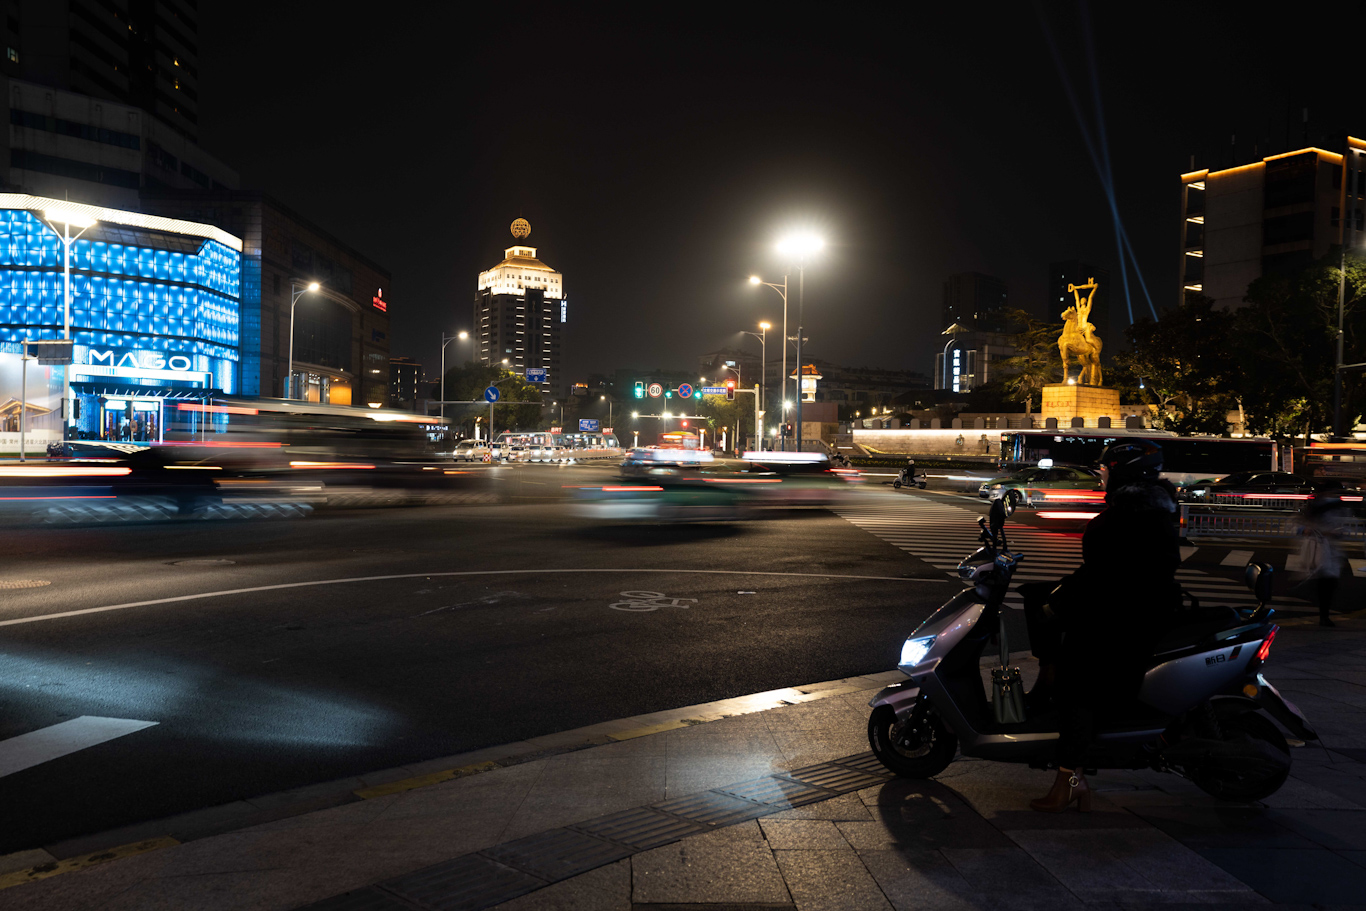 An ebike driver sits parked on an ebike at an intersection at night as blurred traffic flows by. Lights from tall buildings color the background.